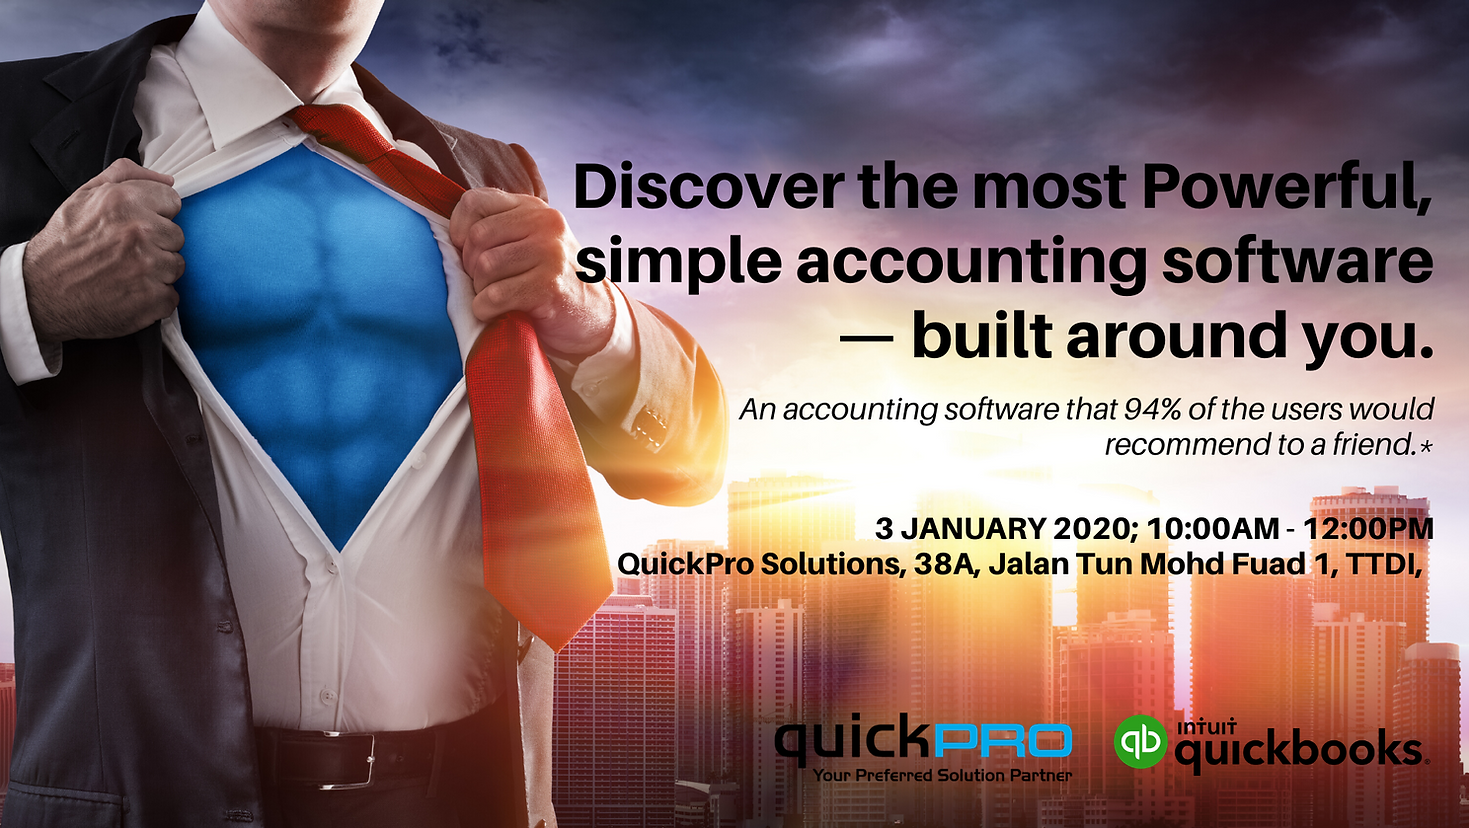 Discover the most powerful, simple accounting software — built around you.